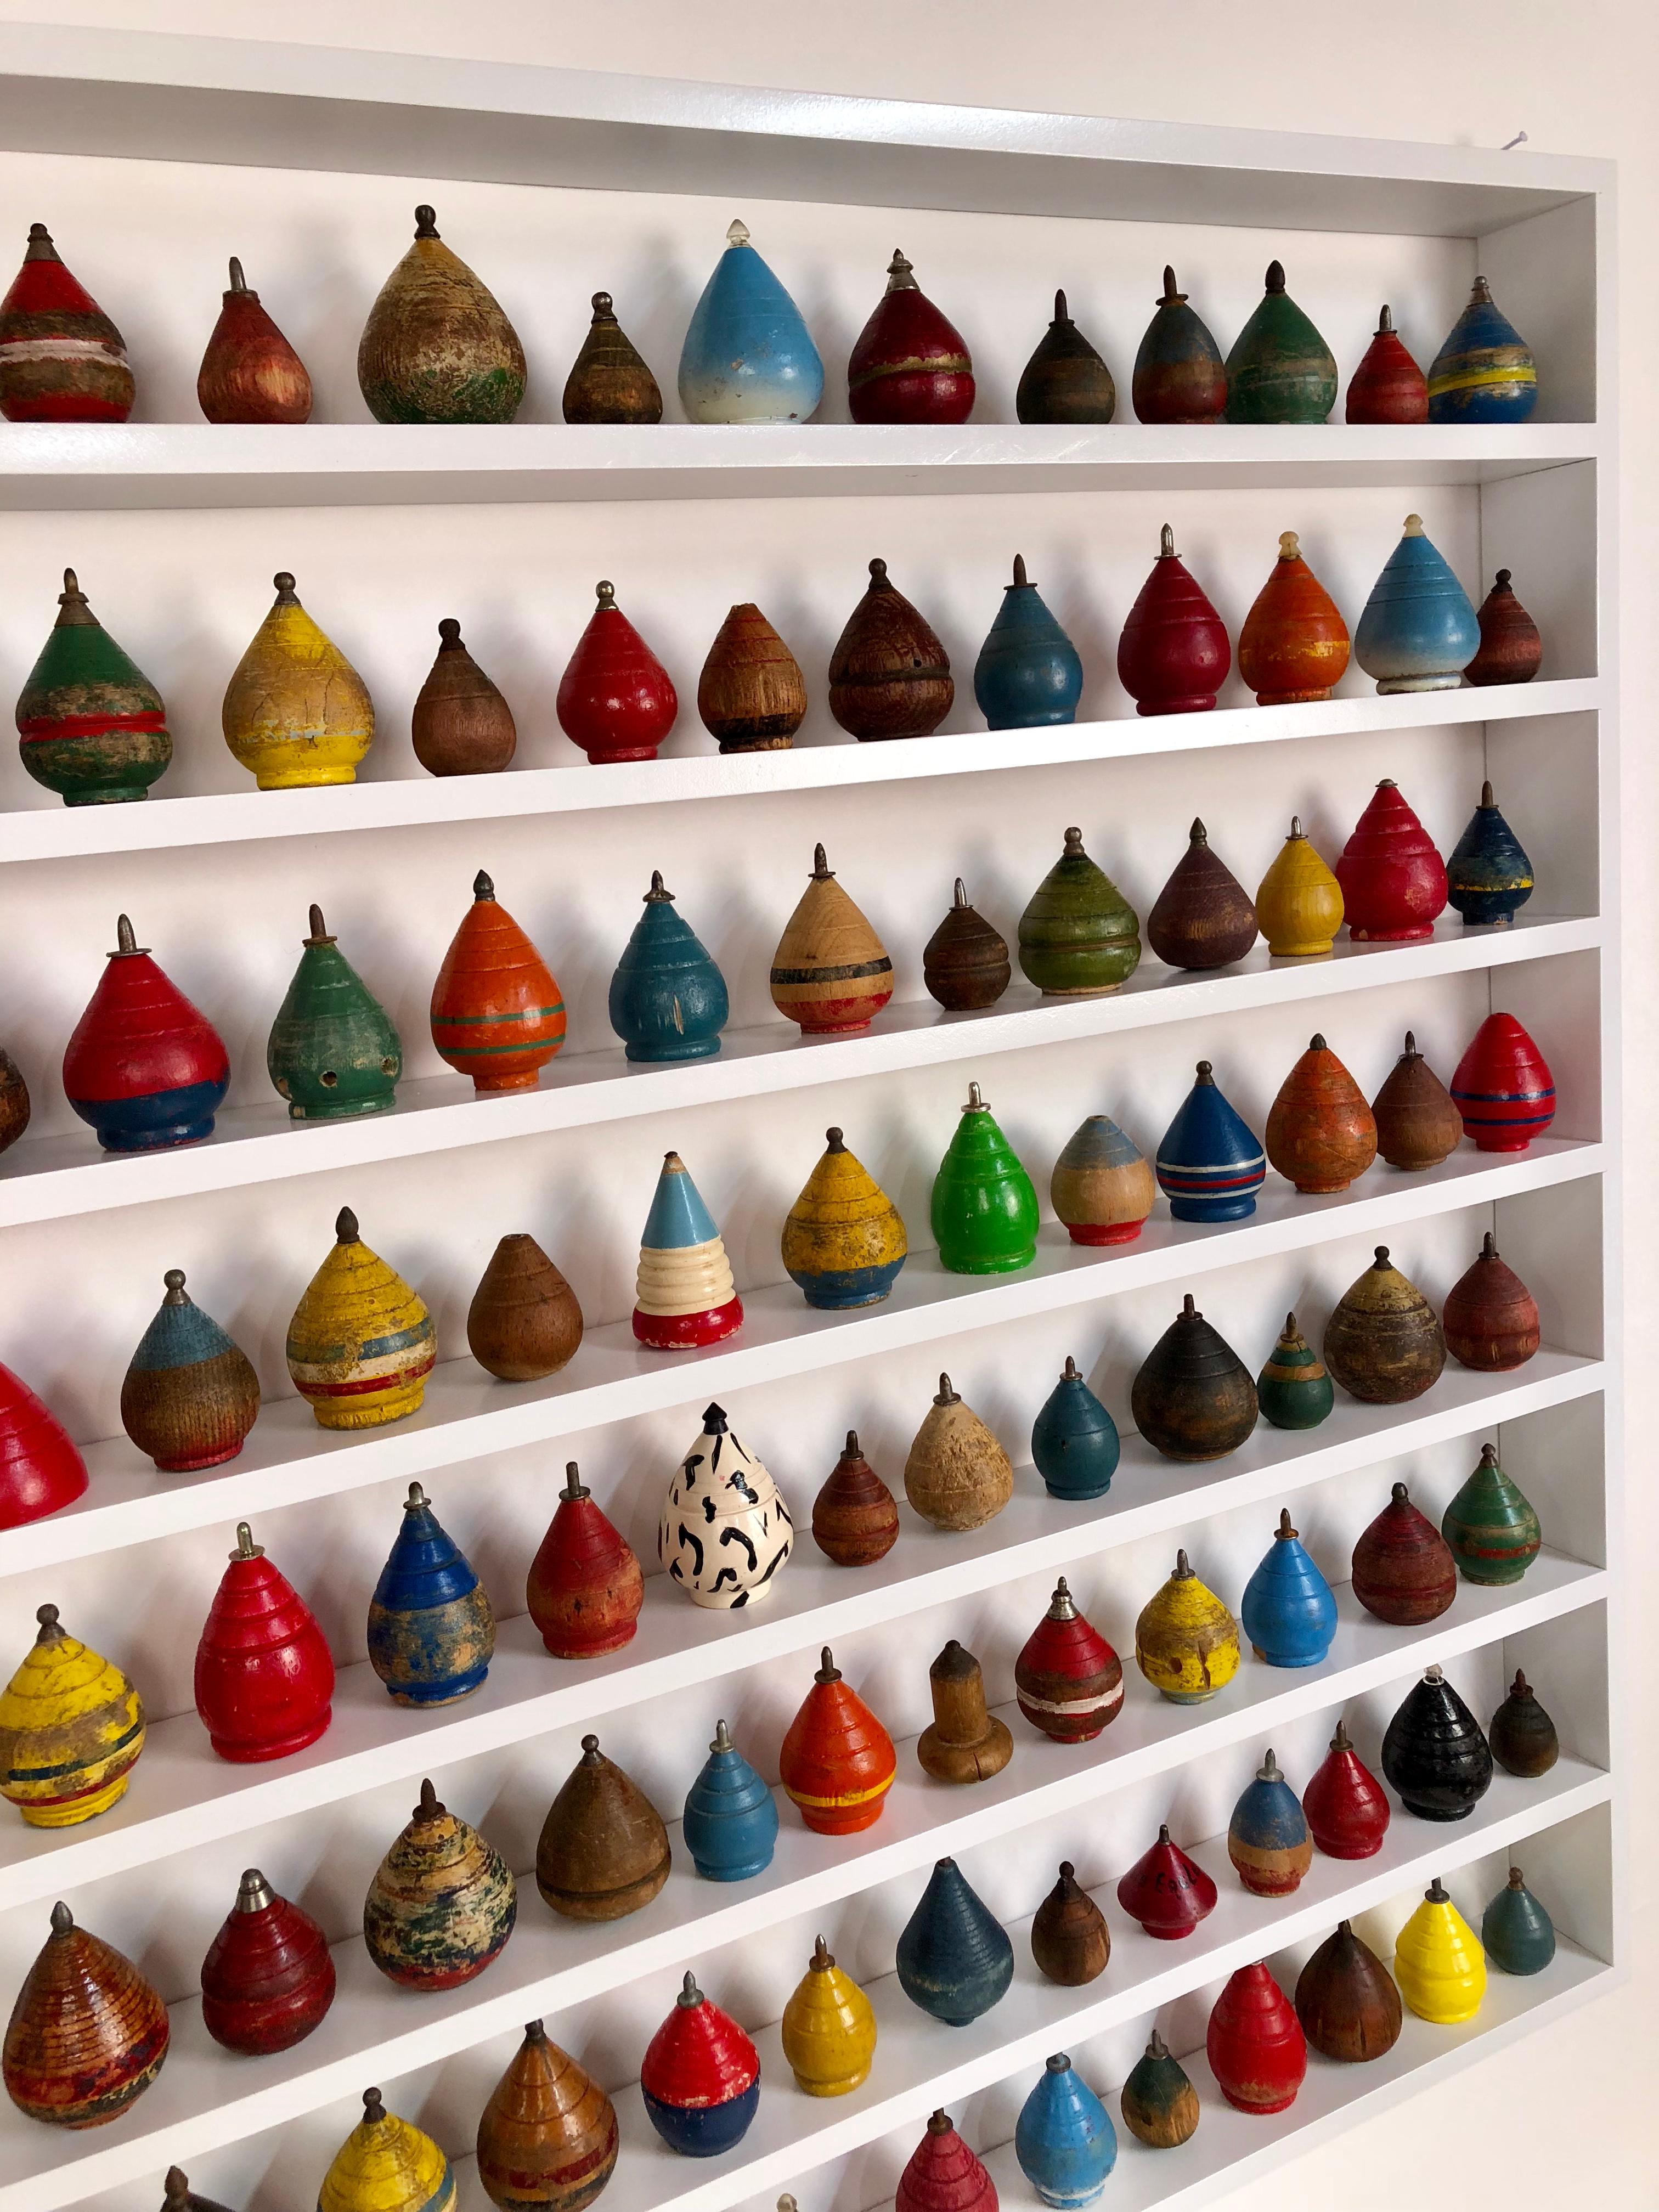 Collection of 100 antique spinning tops in a custom shadow box frame.